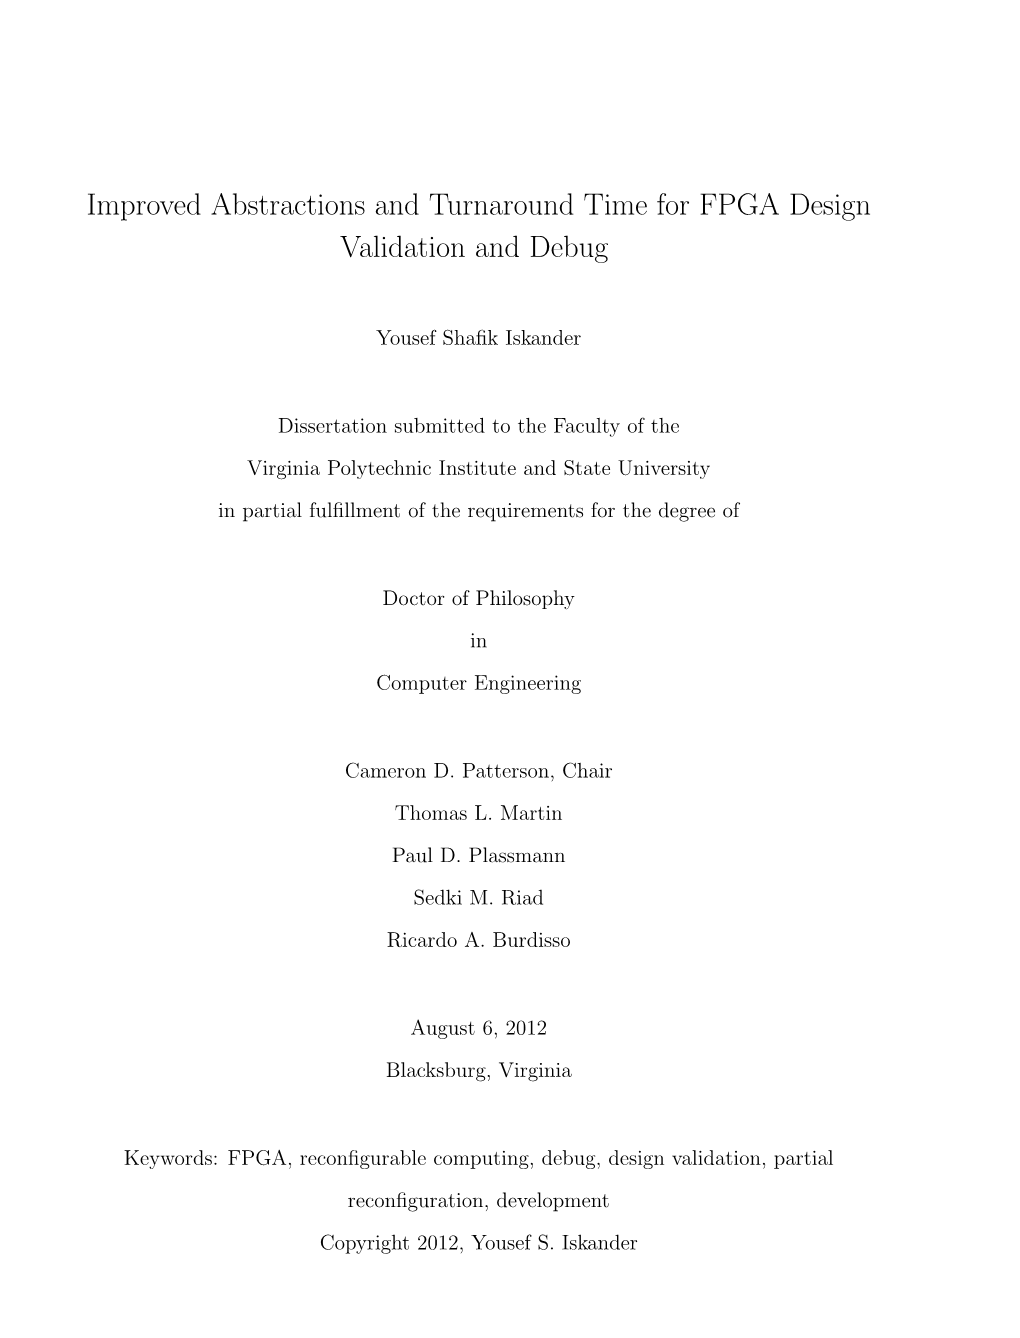 Improved Abstractions and Turnaround Time for FPGA Design Validation and Debug